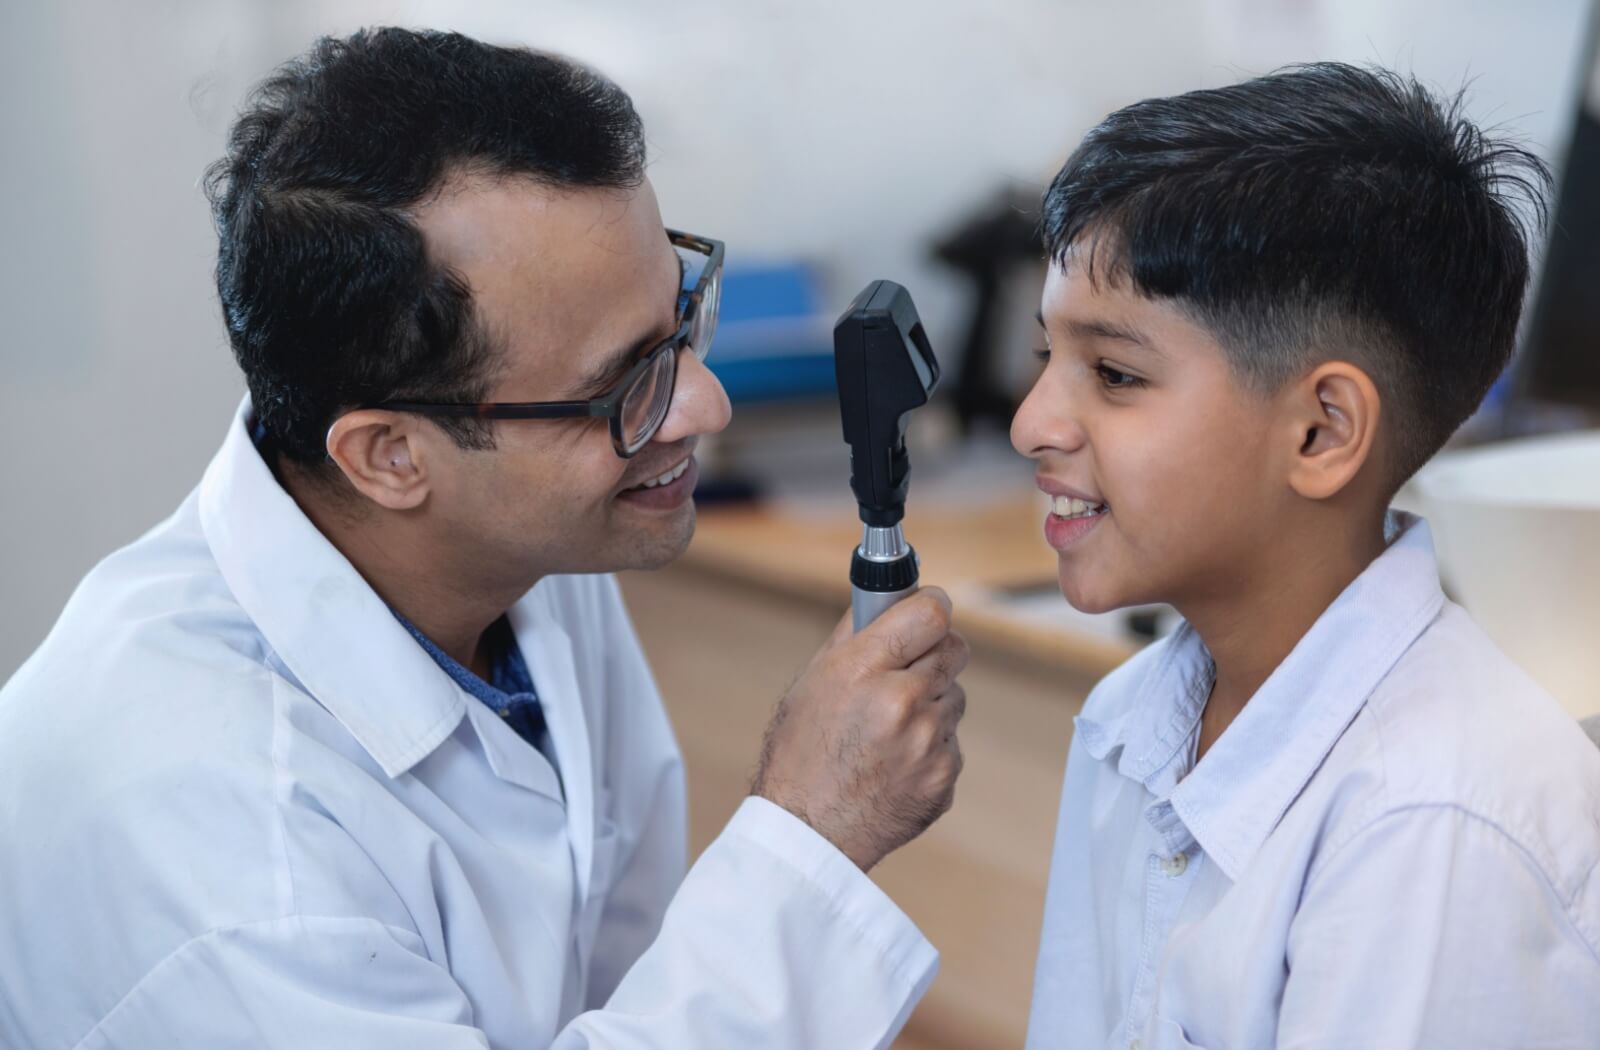 An optometrist checking the eye of a child for signs of myopia.
